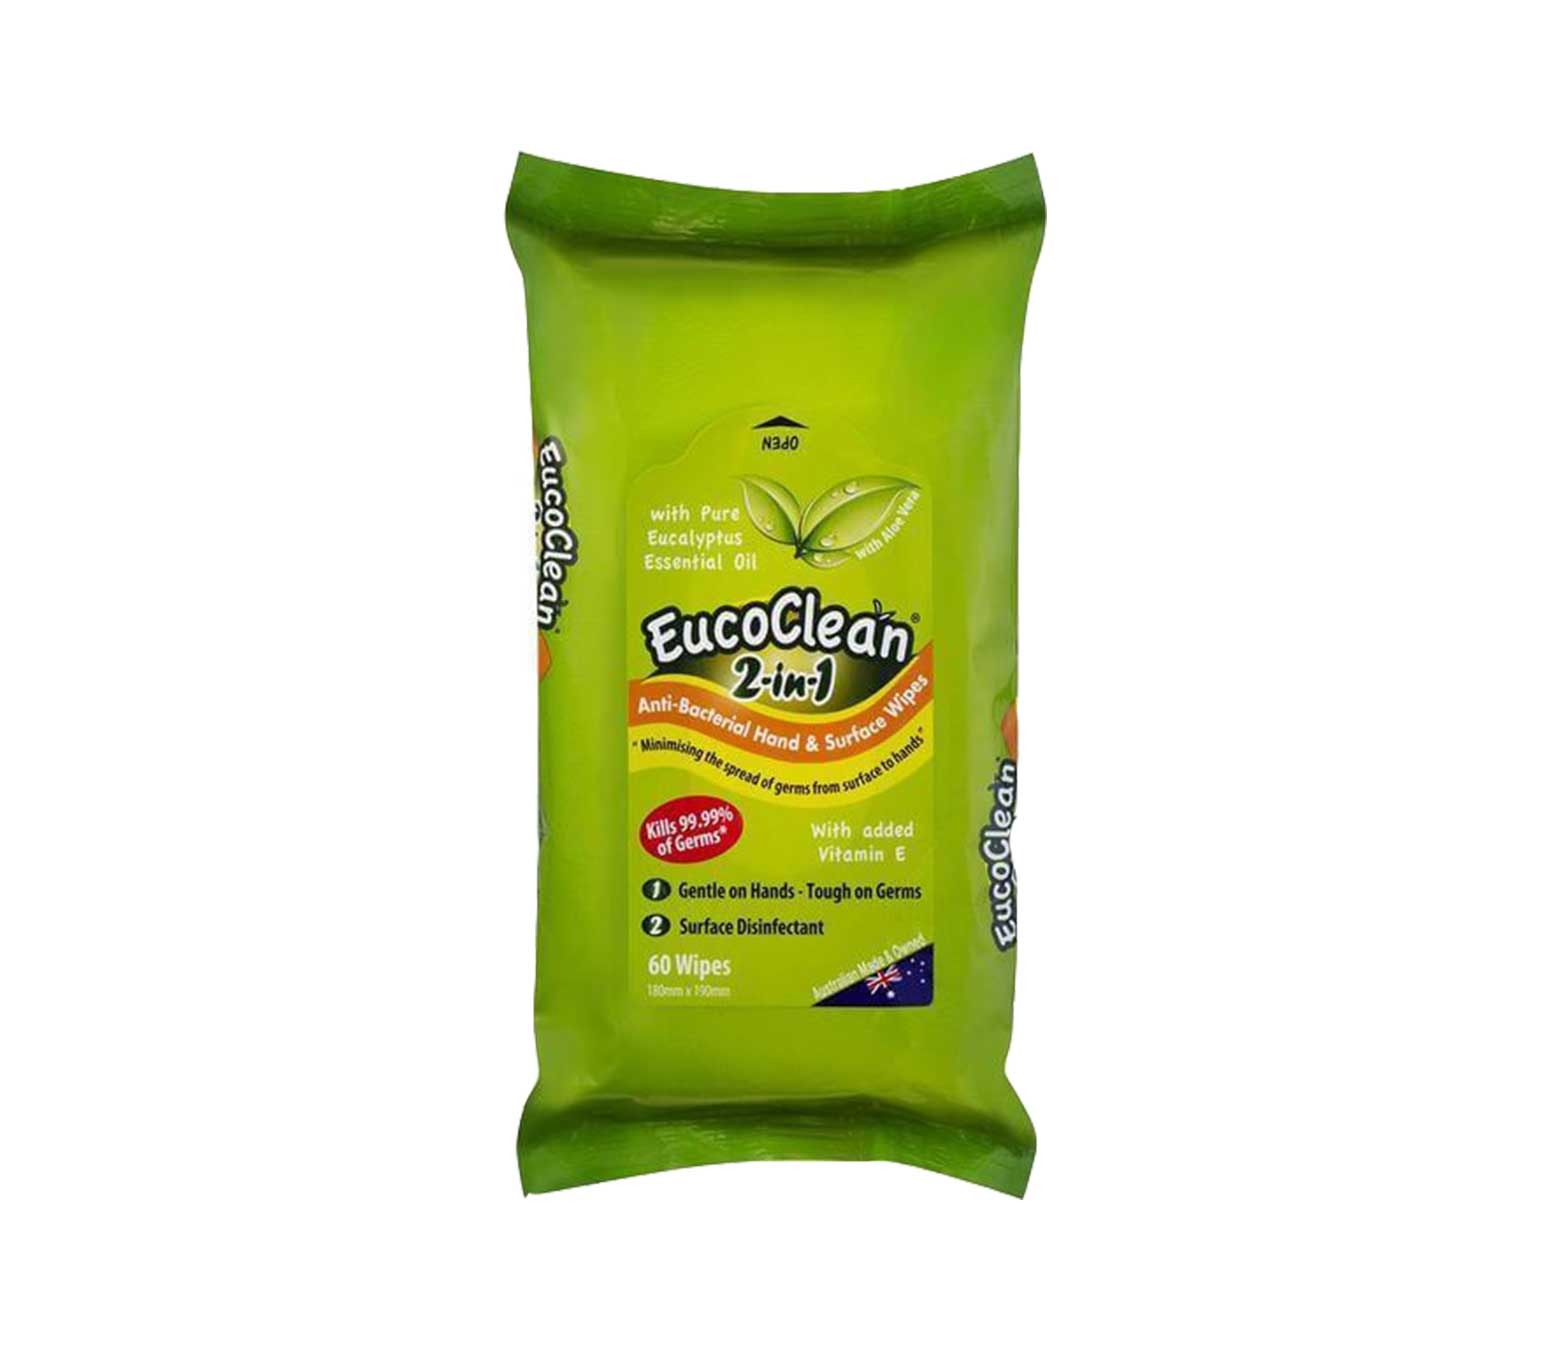 EucoClean 2-in-1 Hand & Surface Wipes.